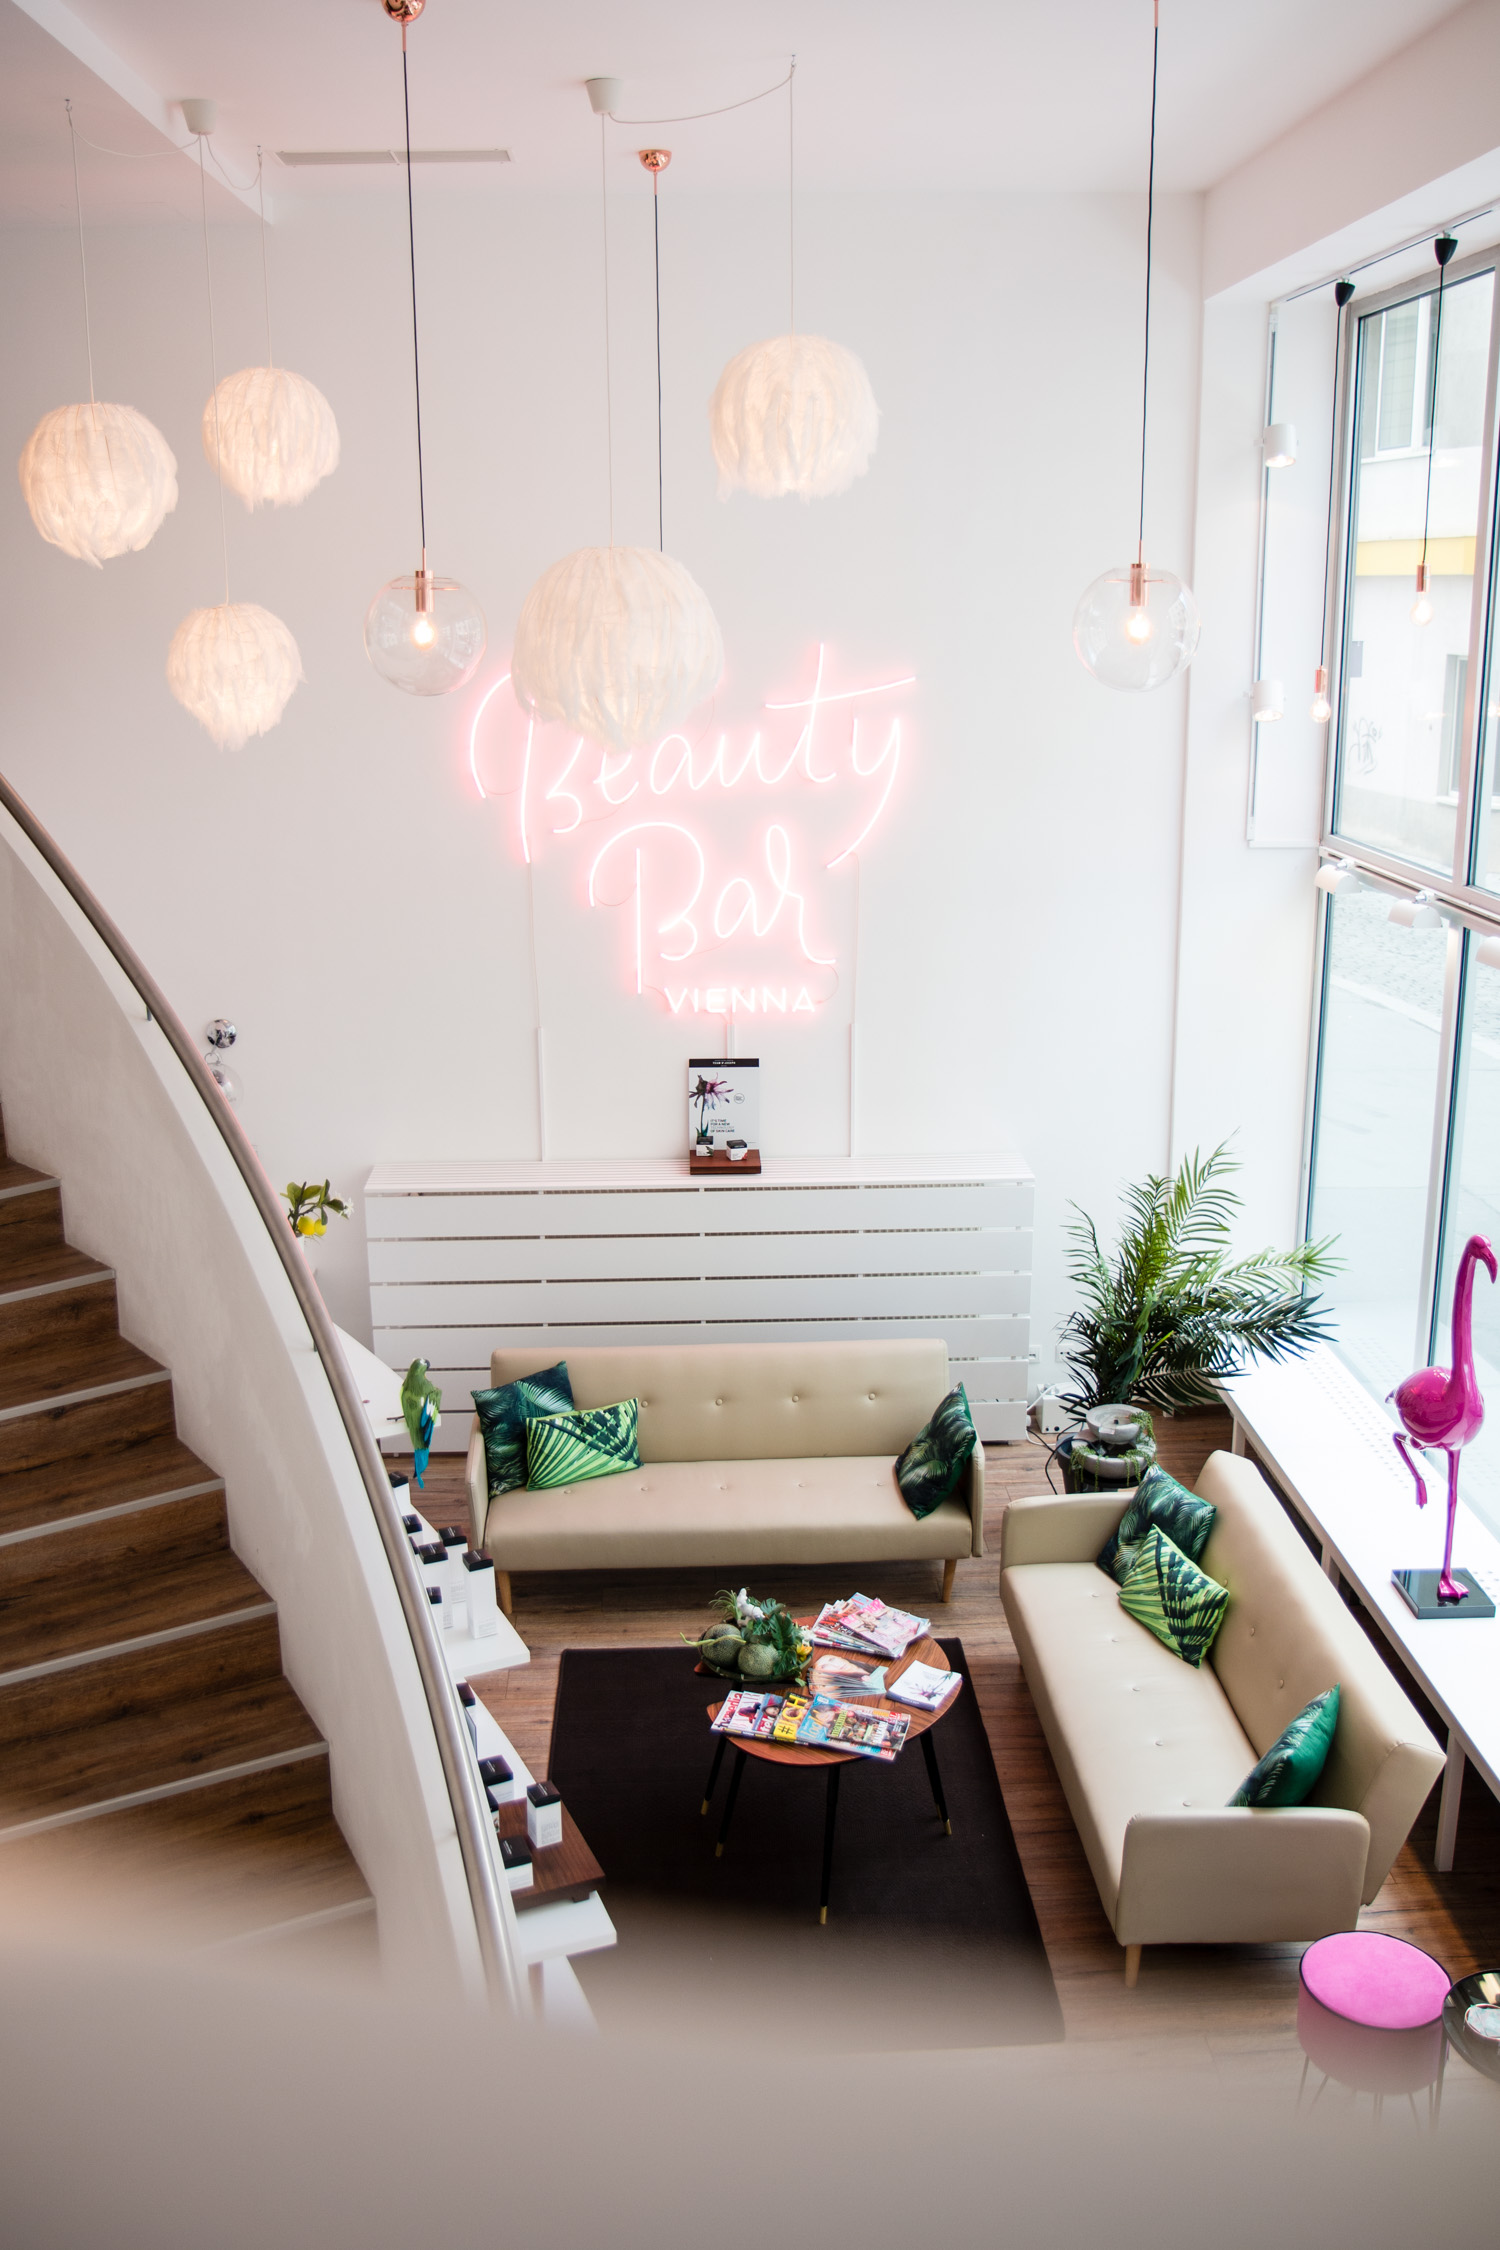 Vienna Picks: The Beauty Bar | The Daily Dose